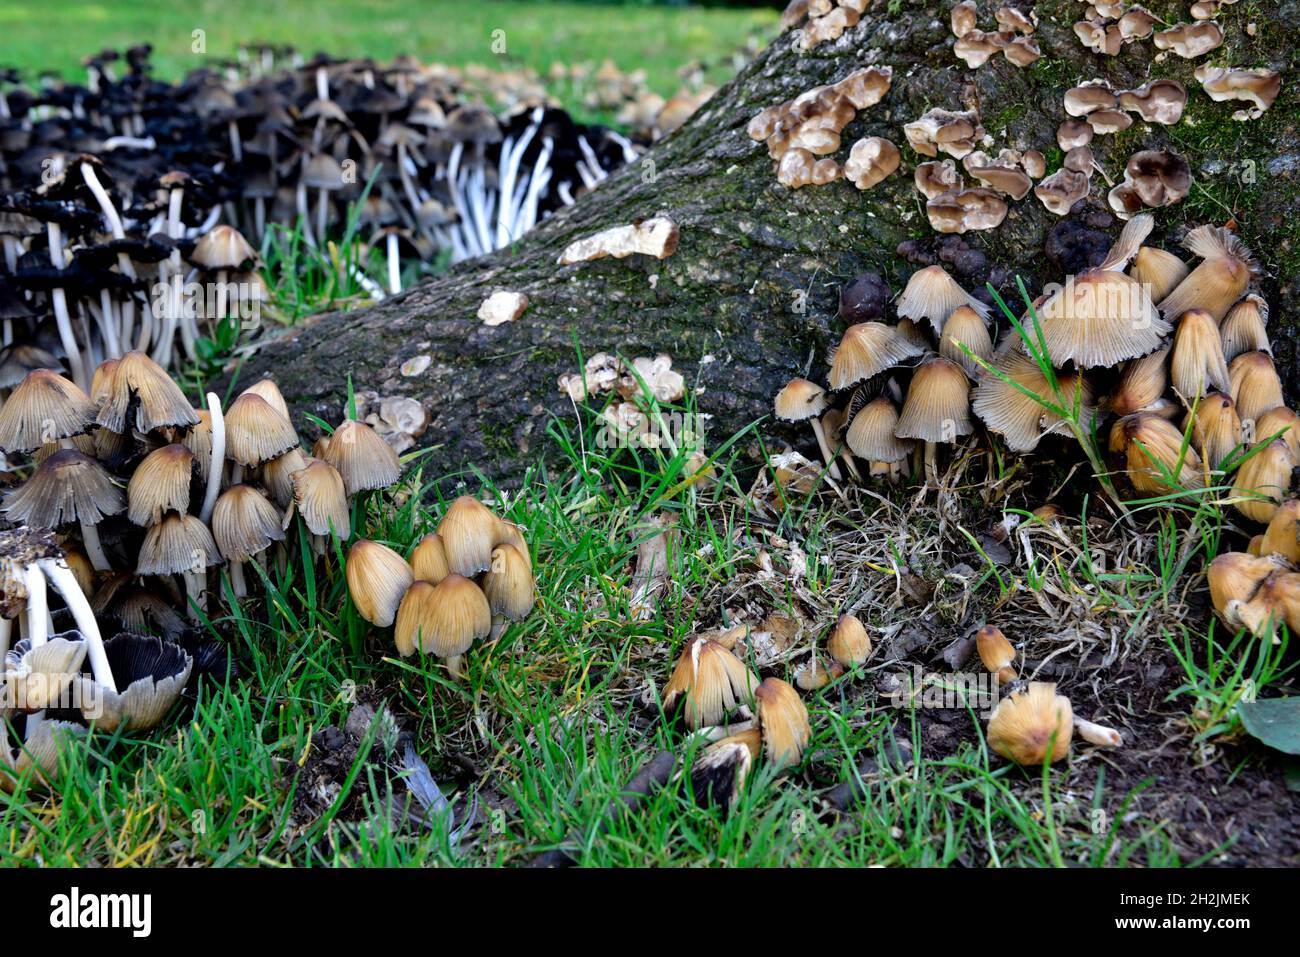 Clusters of common Inkcap mushrooms (Coprinopsis atramentaria) around a rotting hardwood tree stump, some young some autodigesting Stock Photo